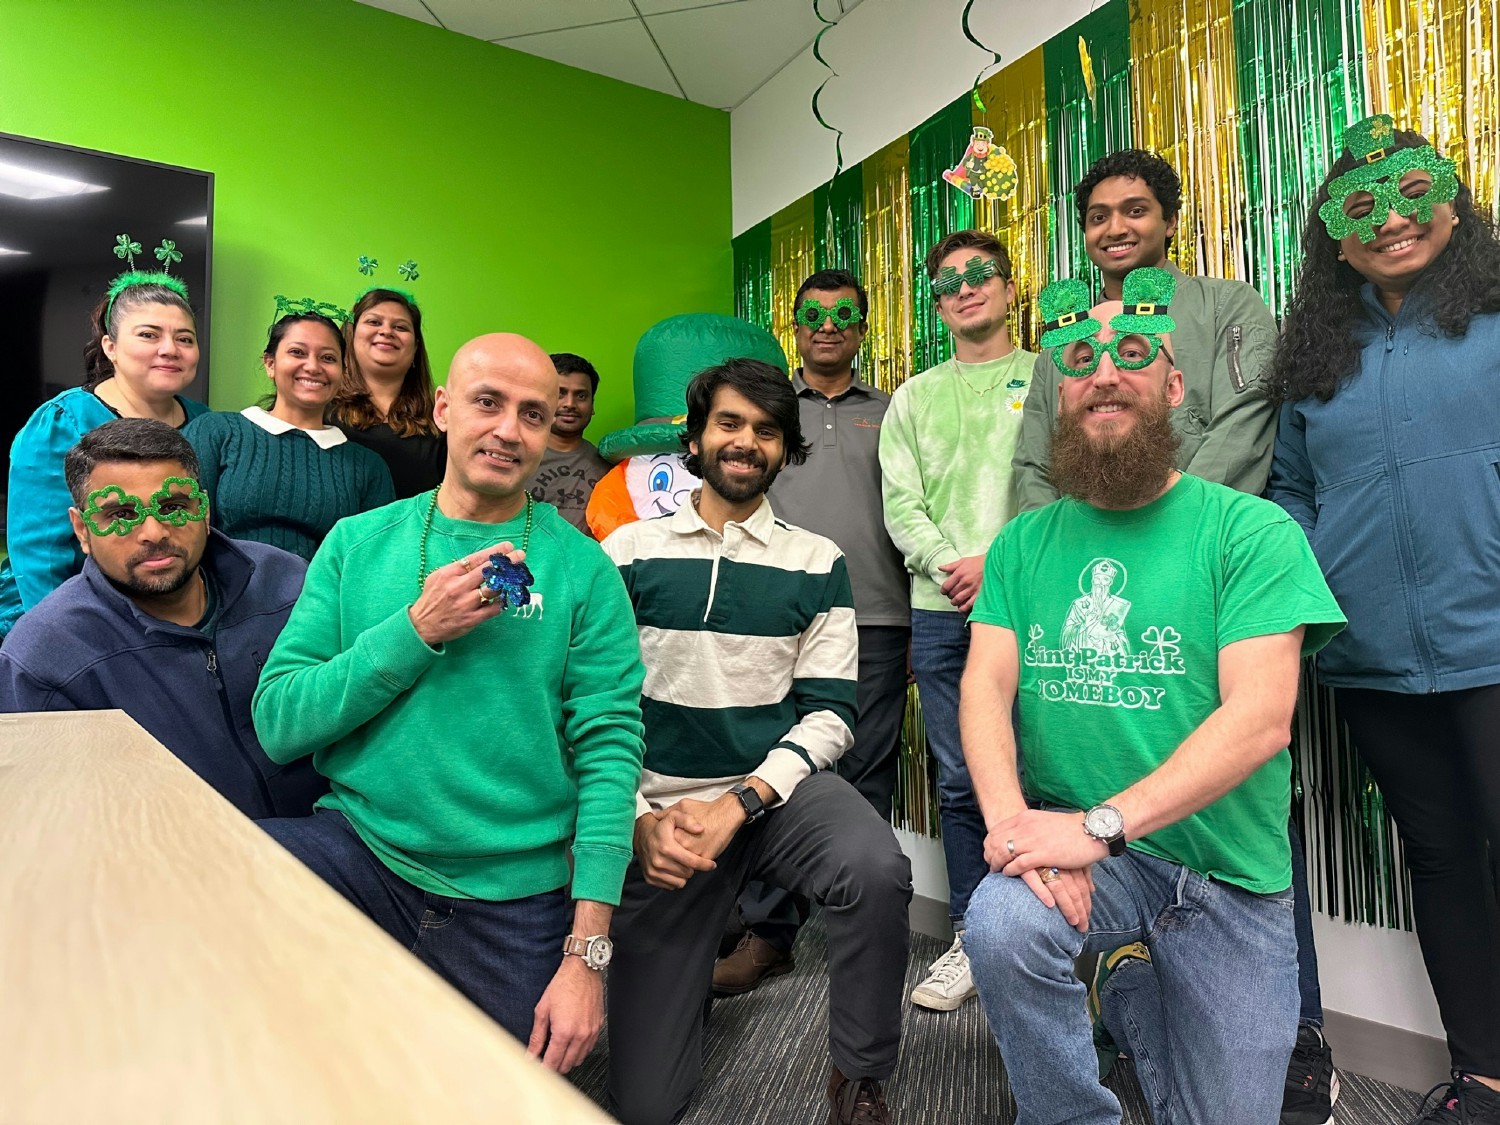 St. Patrick Day @ Chicago office